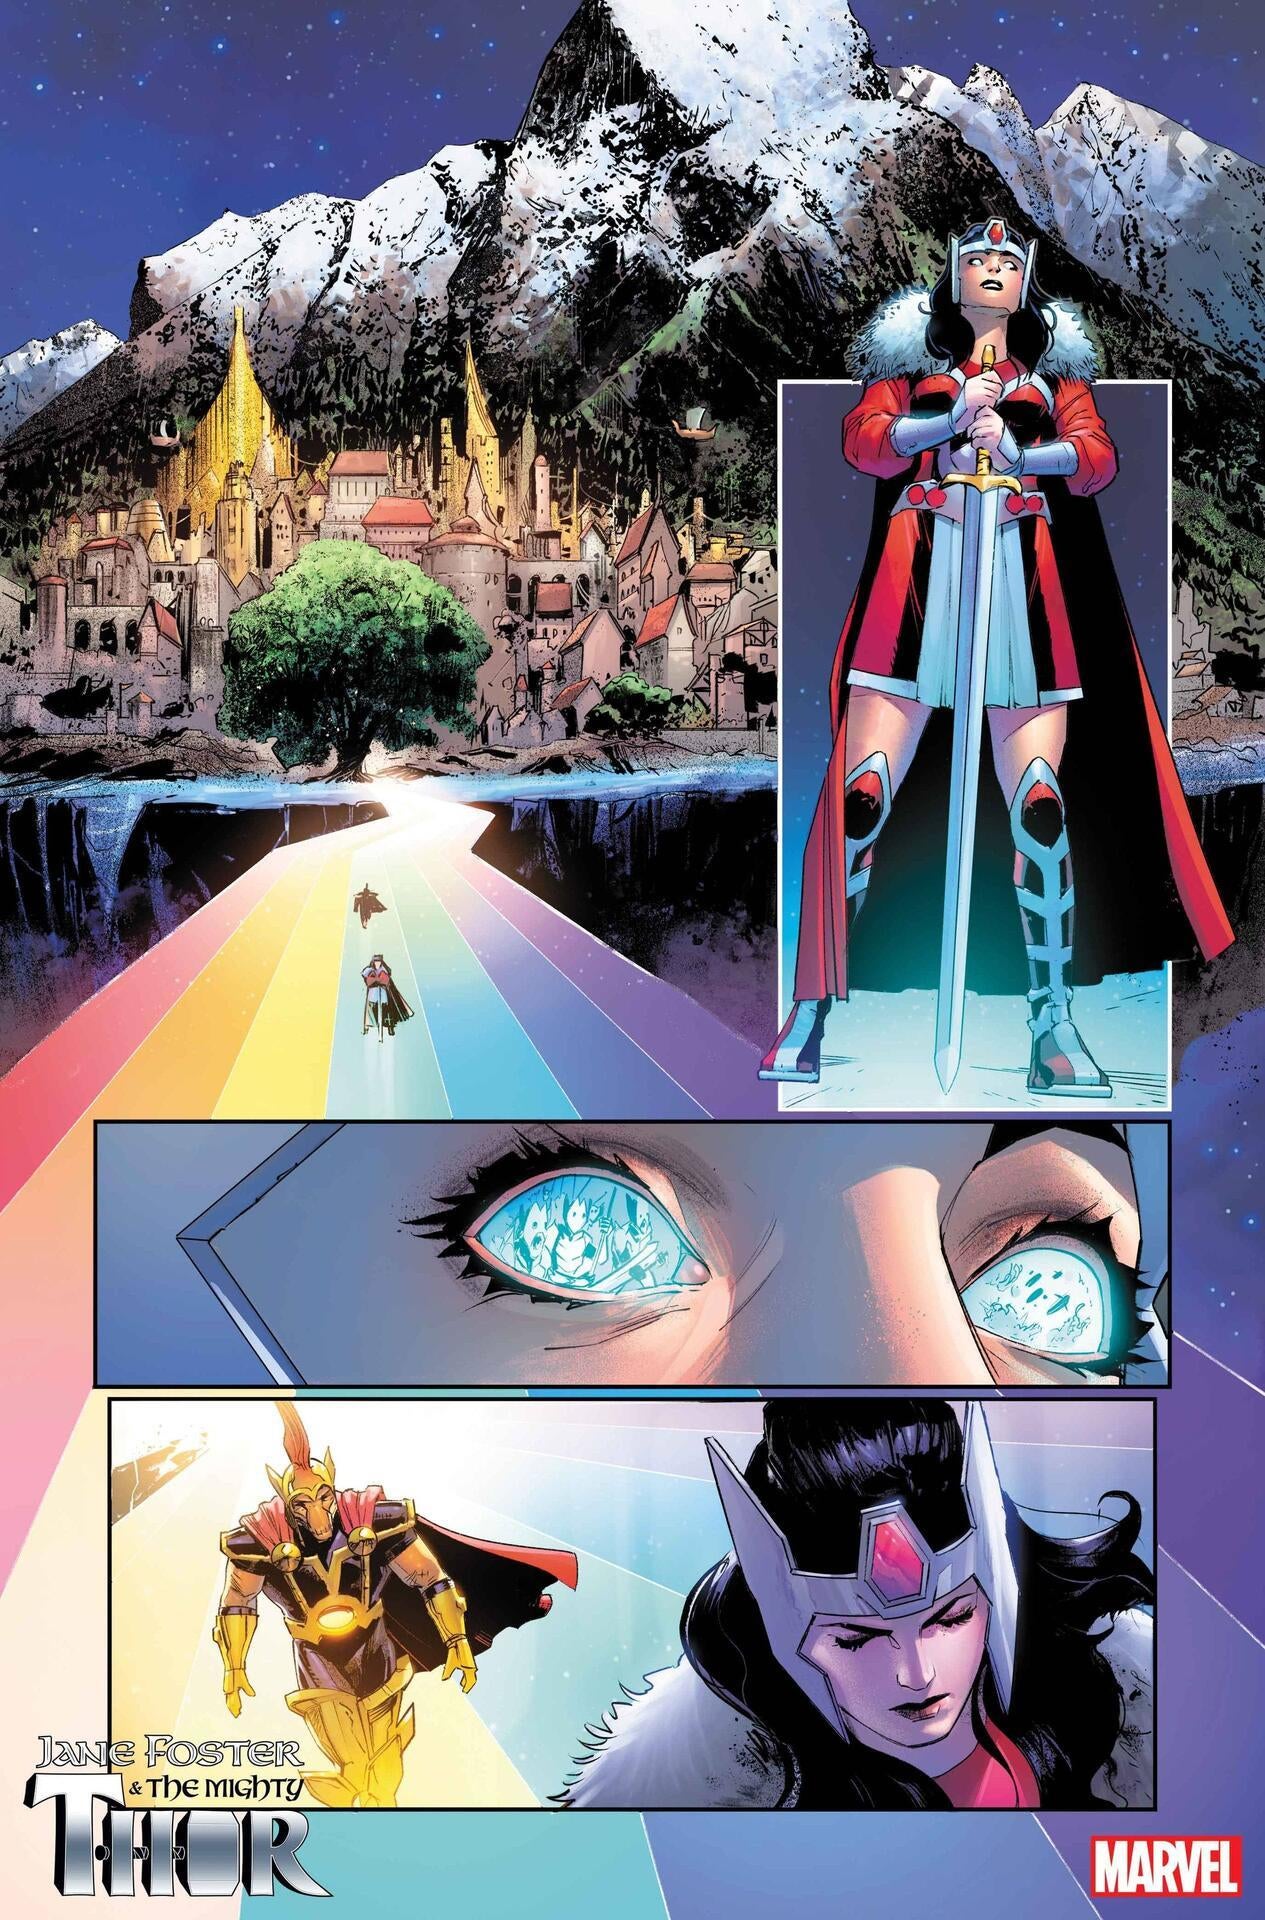 jane-foster-mighty-thor-1-preview-1.jpg